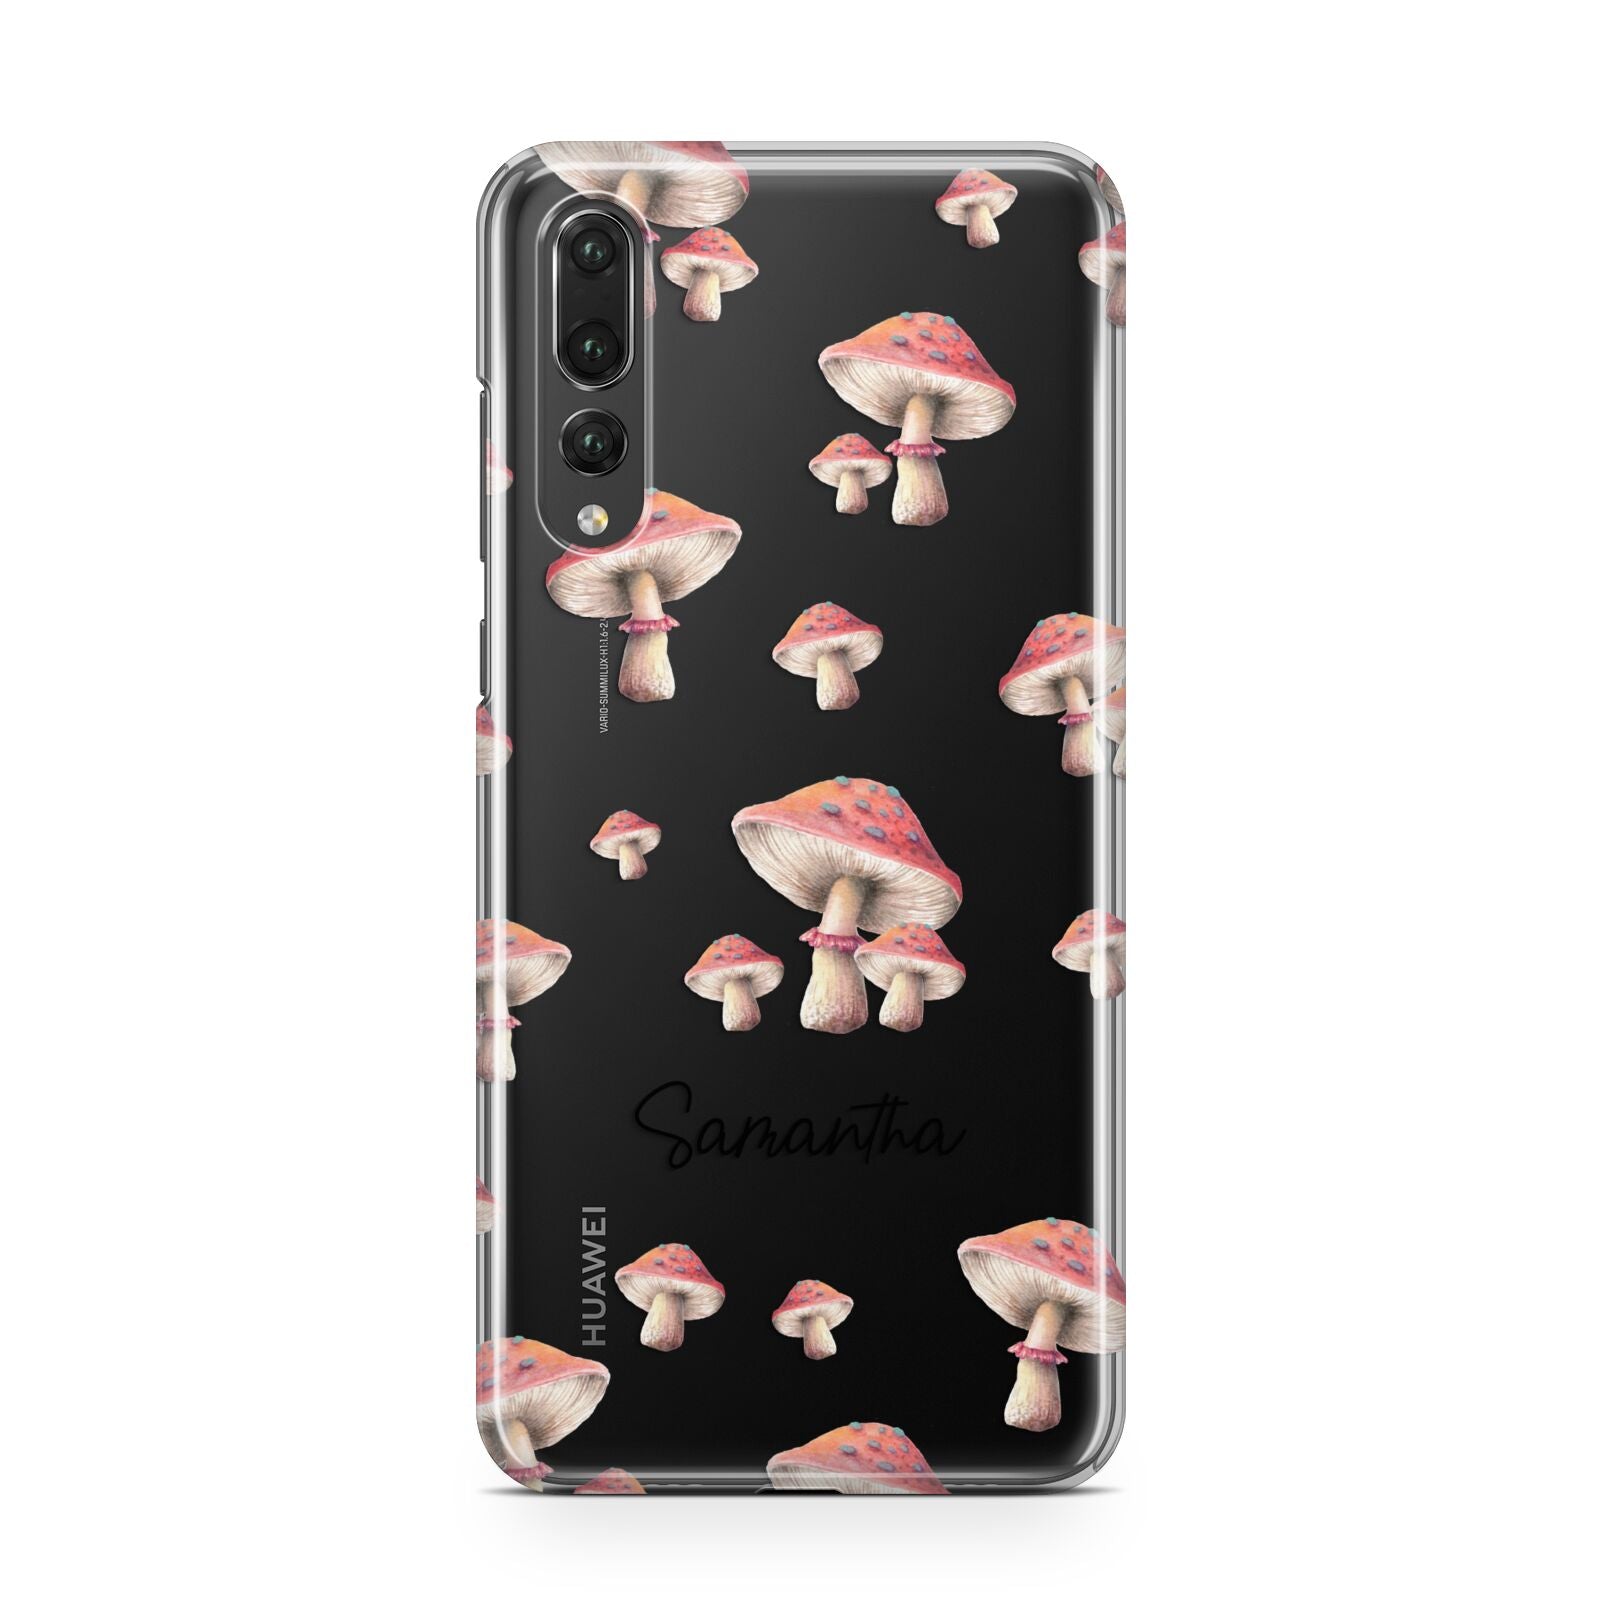 Mushroom Illustrations with Name Huawei P20 Pro Phone Case